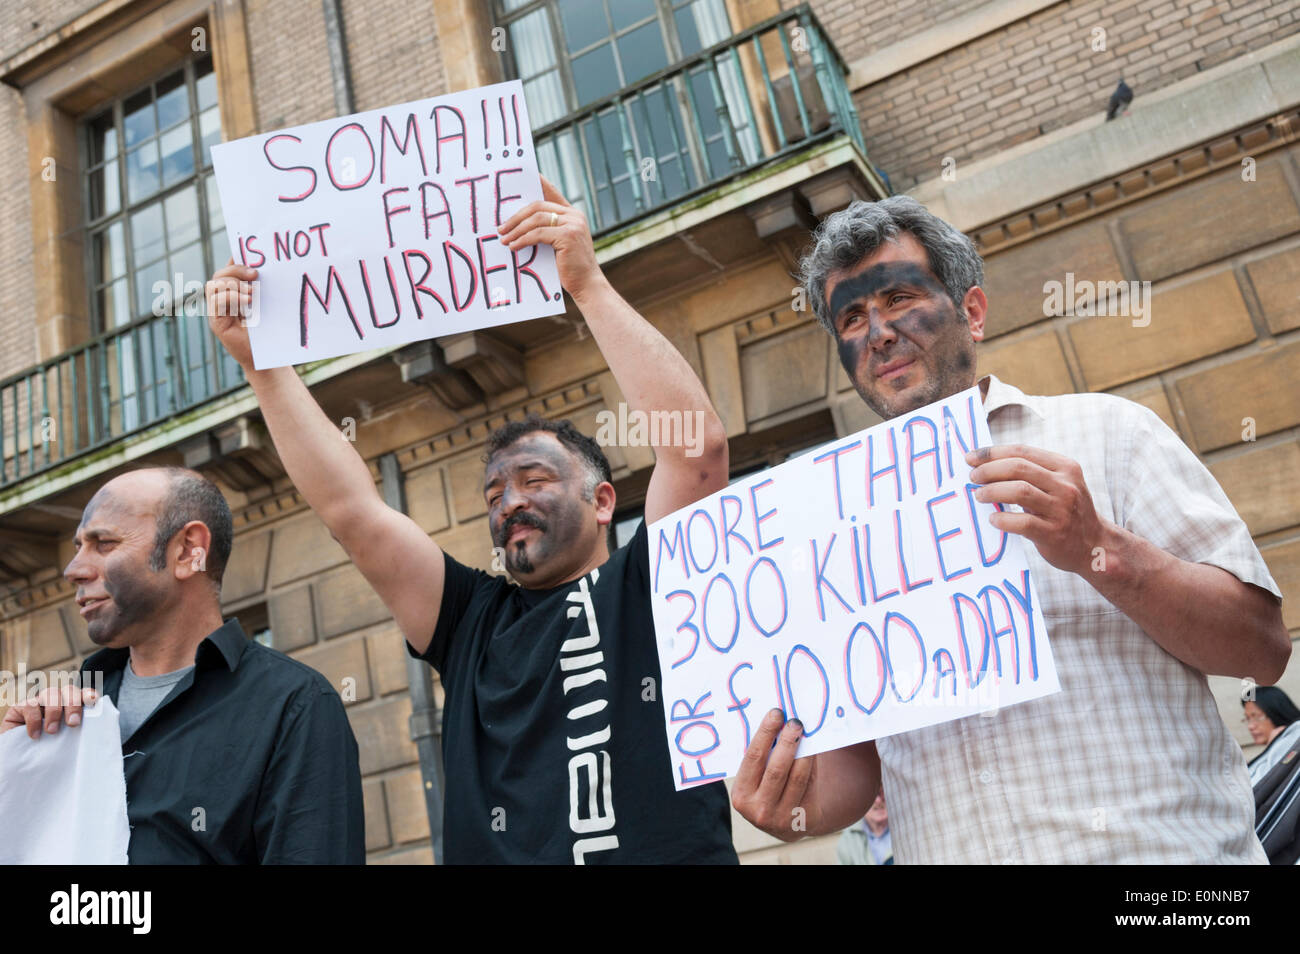 Cambridge UK 17th May 2014. People demonstrate about the mining disaster at Soma, Turkey where 301 people died after an explosion on Tuesday this week.  Around 15 people held a silent protest whilest holding placards outside the Cambridge Guildhall. Credit Julian Eales/Alamy Live News Stock Photo